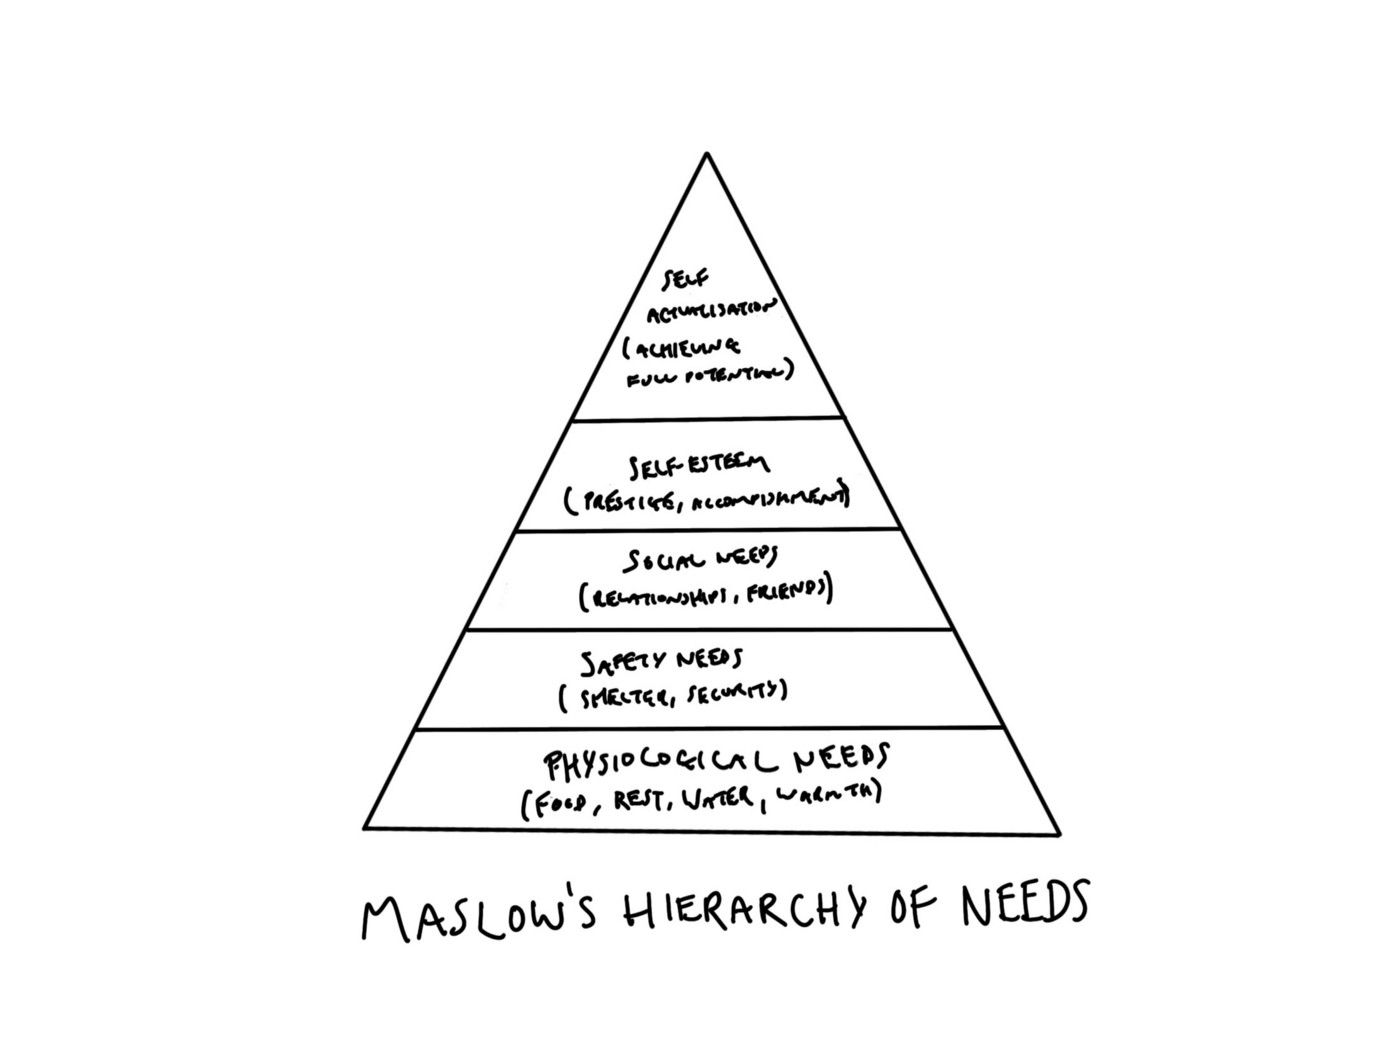 Image drawn by Author based on Maslow’s Hierarchy of Needs